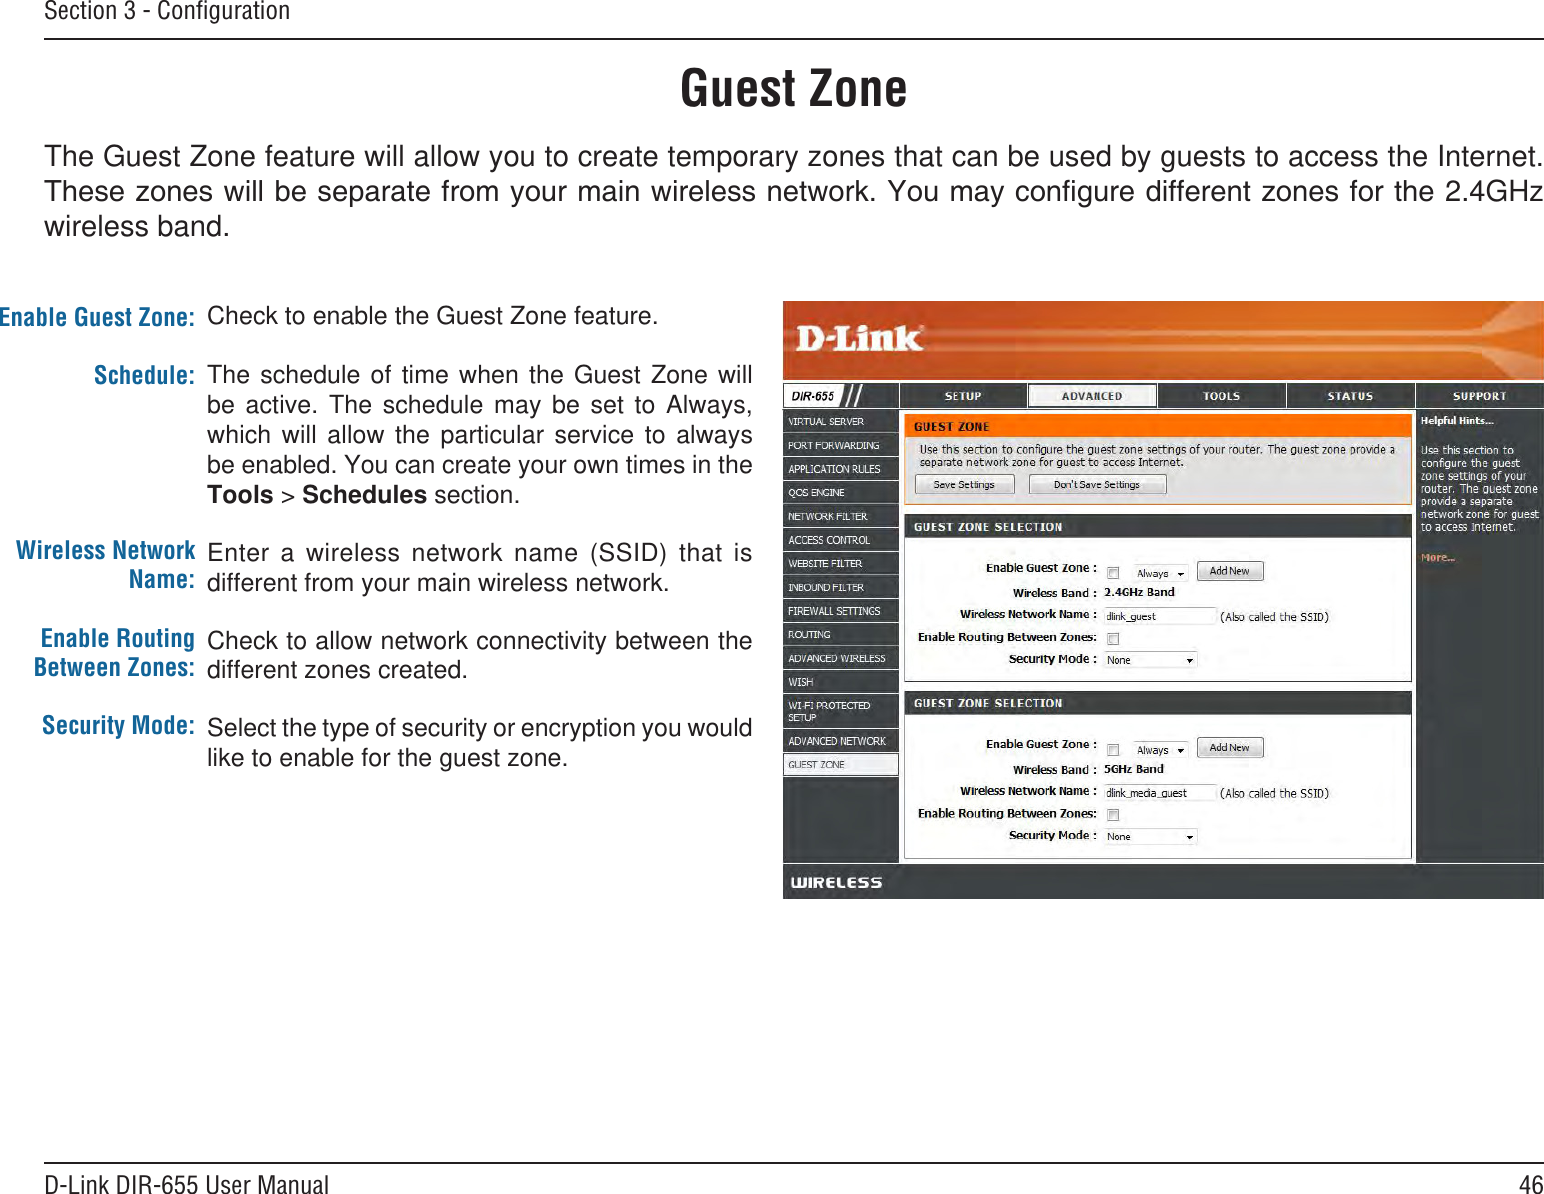 46D-Link DIR-655 User ManualSection 3 - ConﬁgurationGuest ZoneCheck to enable the Guest Zone feature. The  schedule  of  time  when  the  Guest  Zone  will be  active.  The  schedule  may  be  set  to  Always, which  will  allow  the  particular  service  to  always be enabled. You can create your own times in the Tools &gt; Schedules section.Enter  a  wireless  network  name  (SSID)  that  is different from your main wireless network.Check to allow network connectivity between the different zones created. Select the type of security or encryption you would like to enable for the guest zone.  Enable Guest Zone:Schedule:Wireless Network Name:Enable Routing Between Zones:Security Mode:The Guest Zone feature will allow you to create temporary zones that can be used by guests to access the Internet. 2.4GHz wireless band.